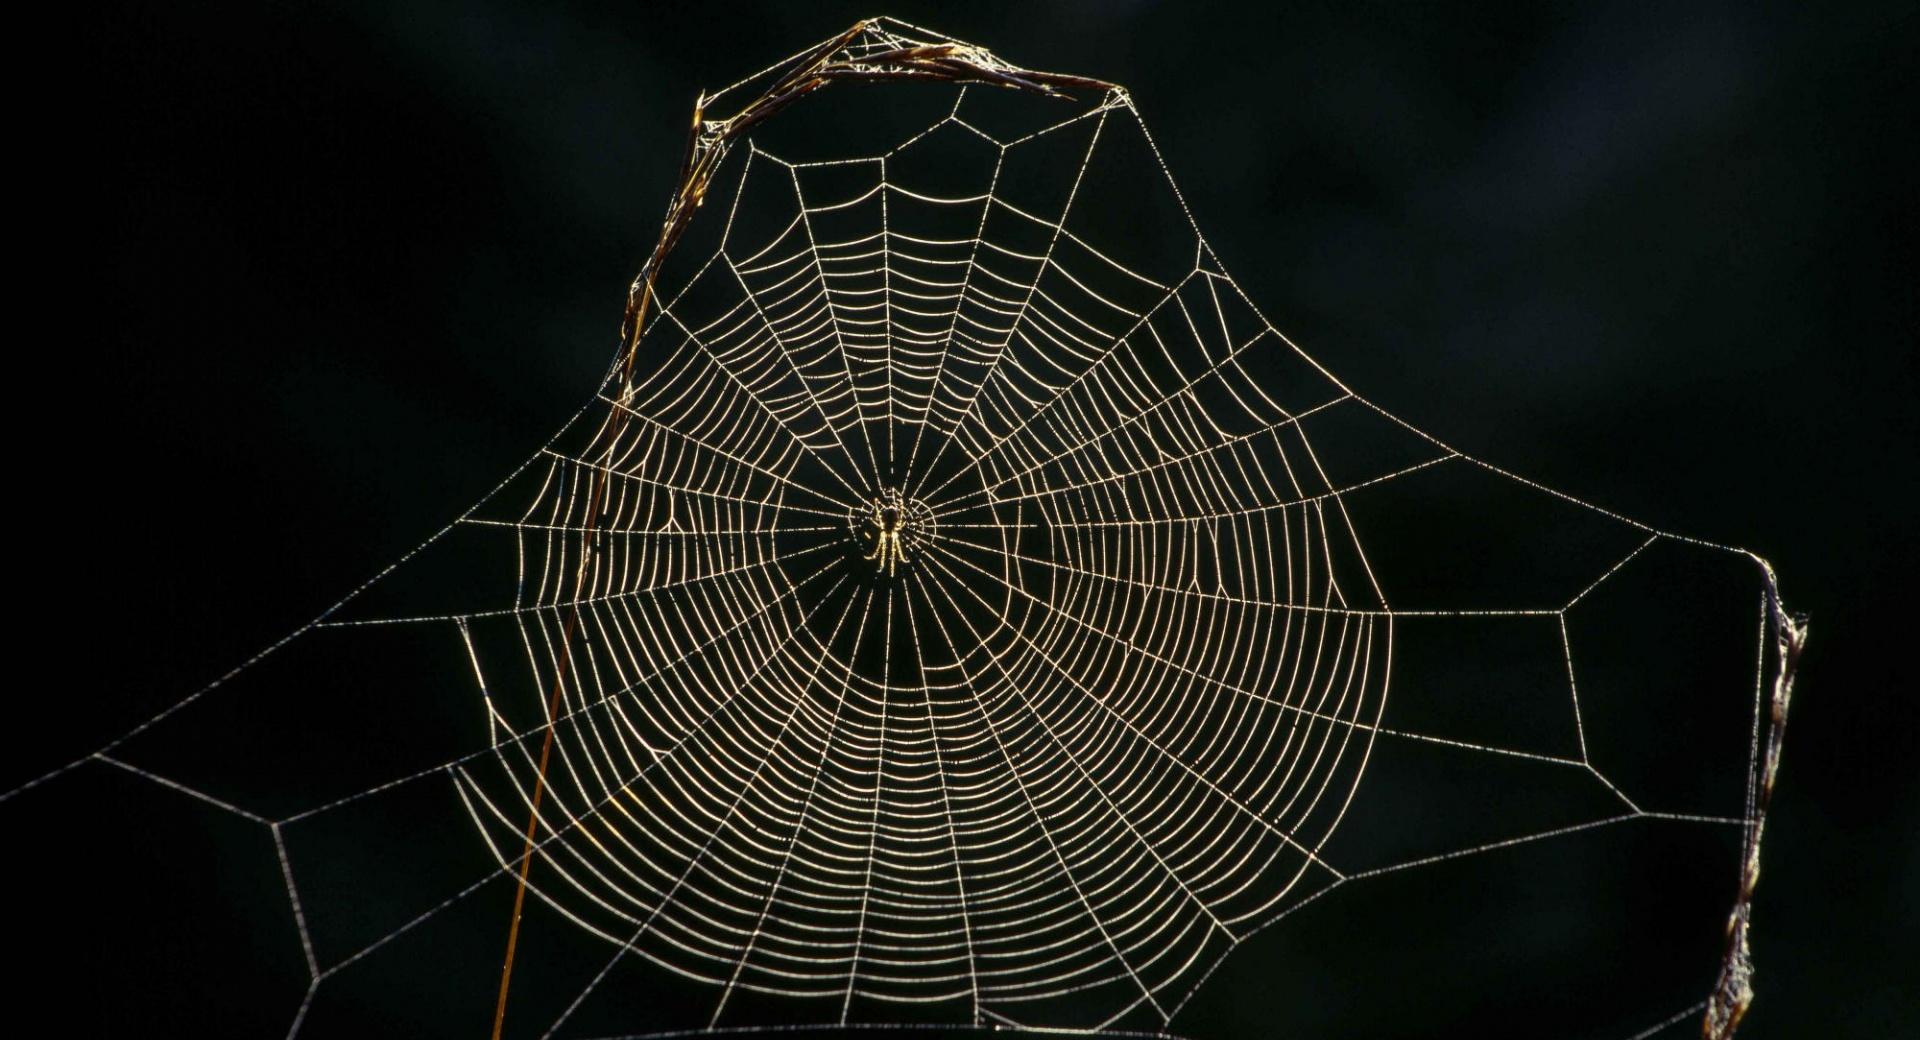 Delicate Spider Web Sneznik Forest Slovenia wallpapers HD quality